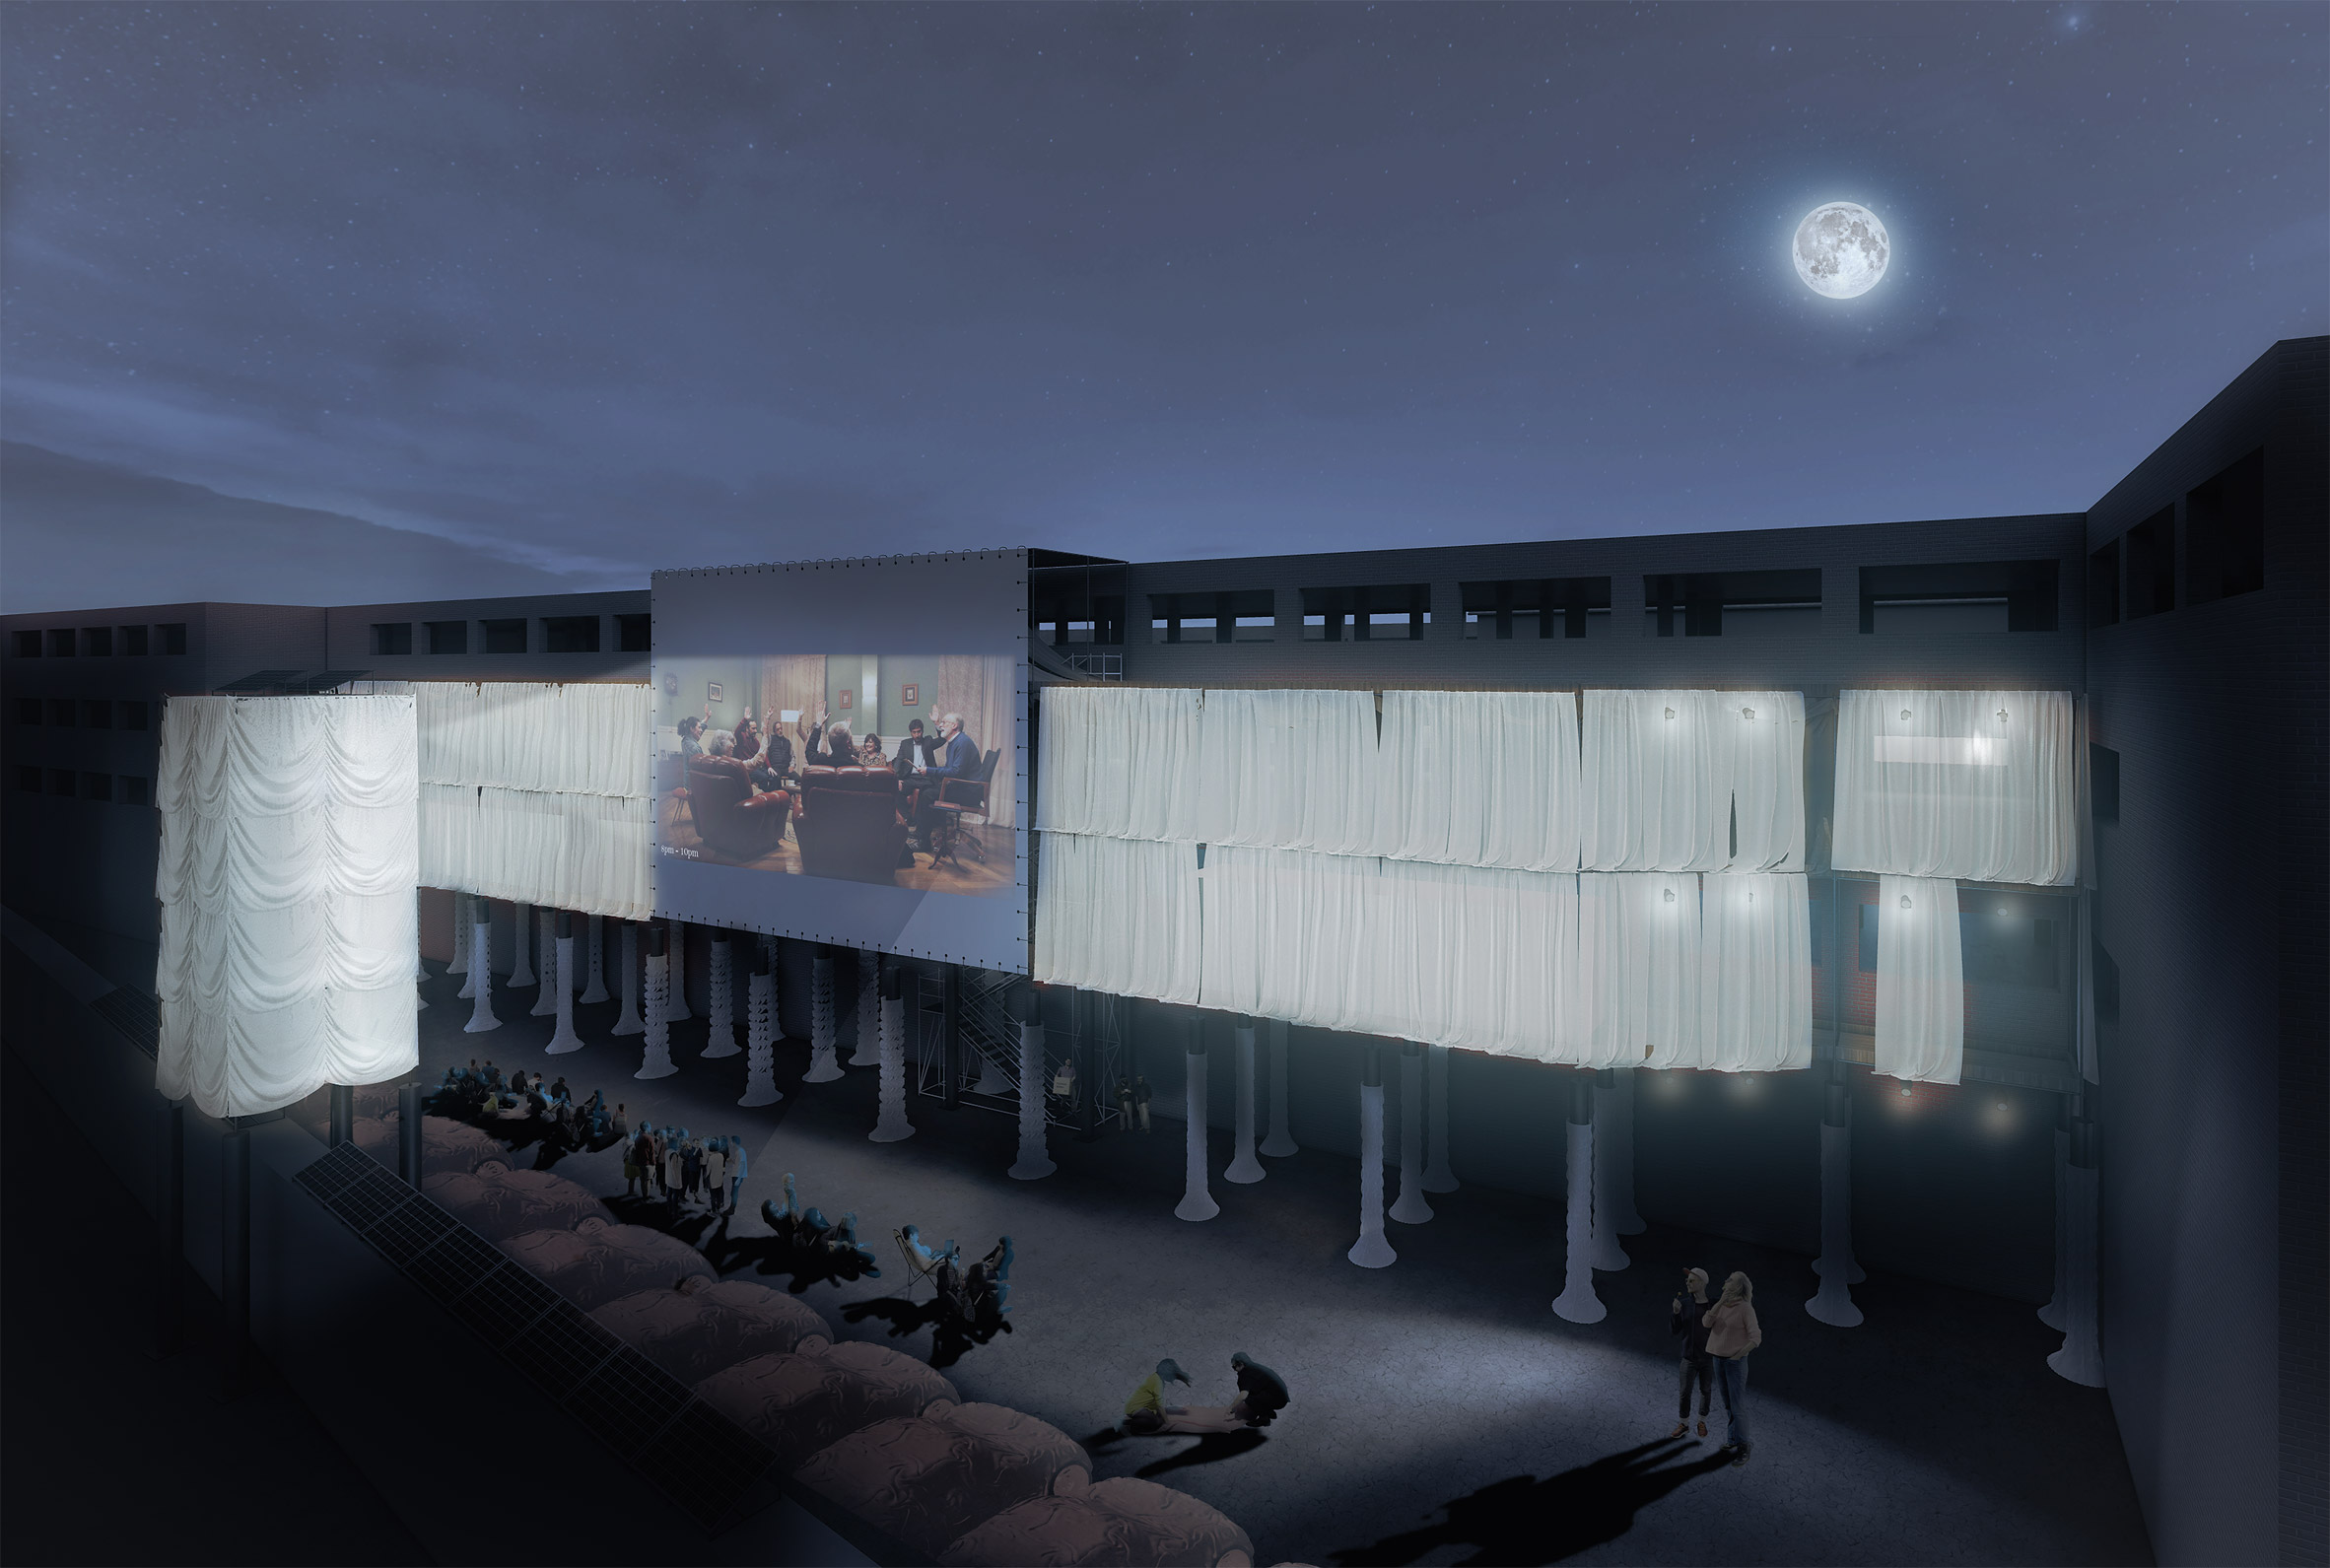 Visualisation showing outdoor cinema made from converted multi-storey car park